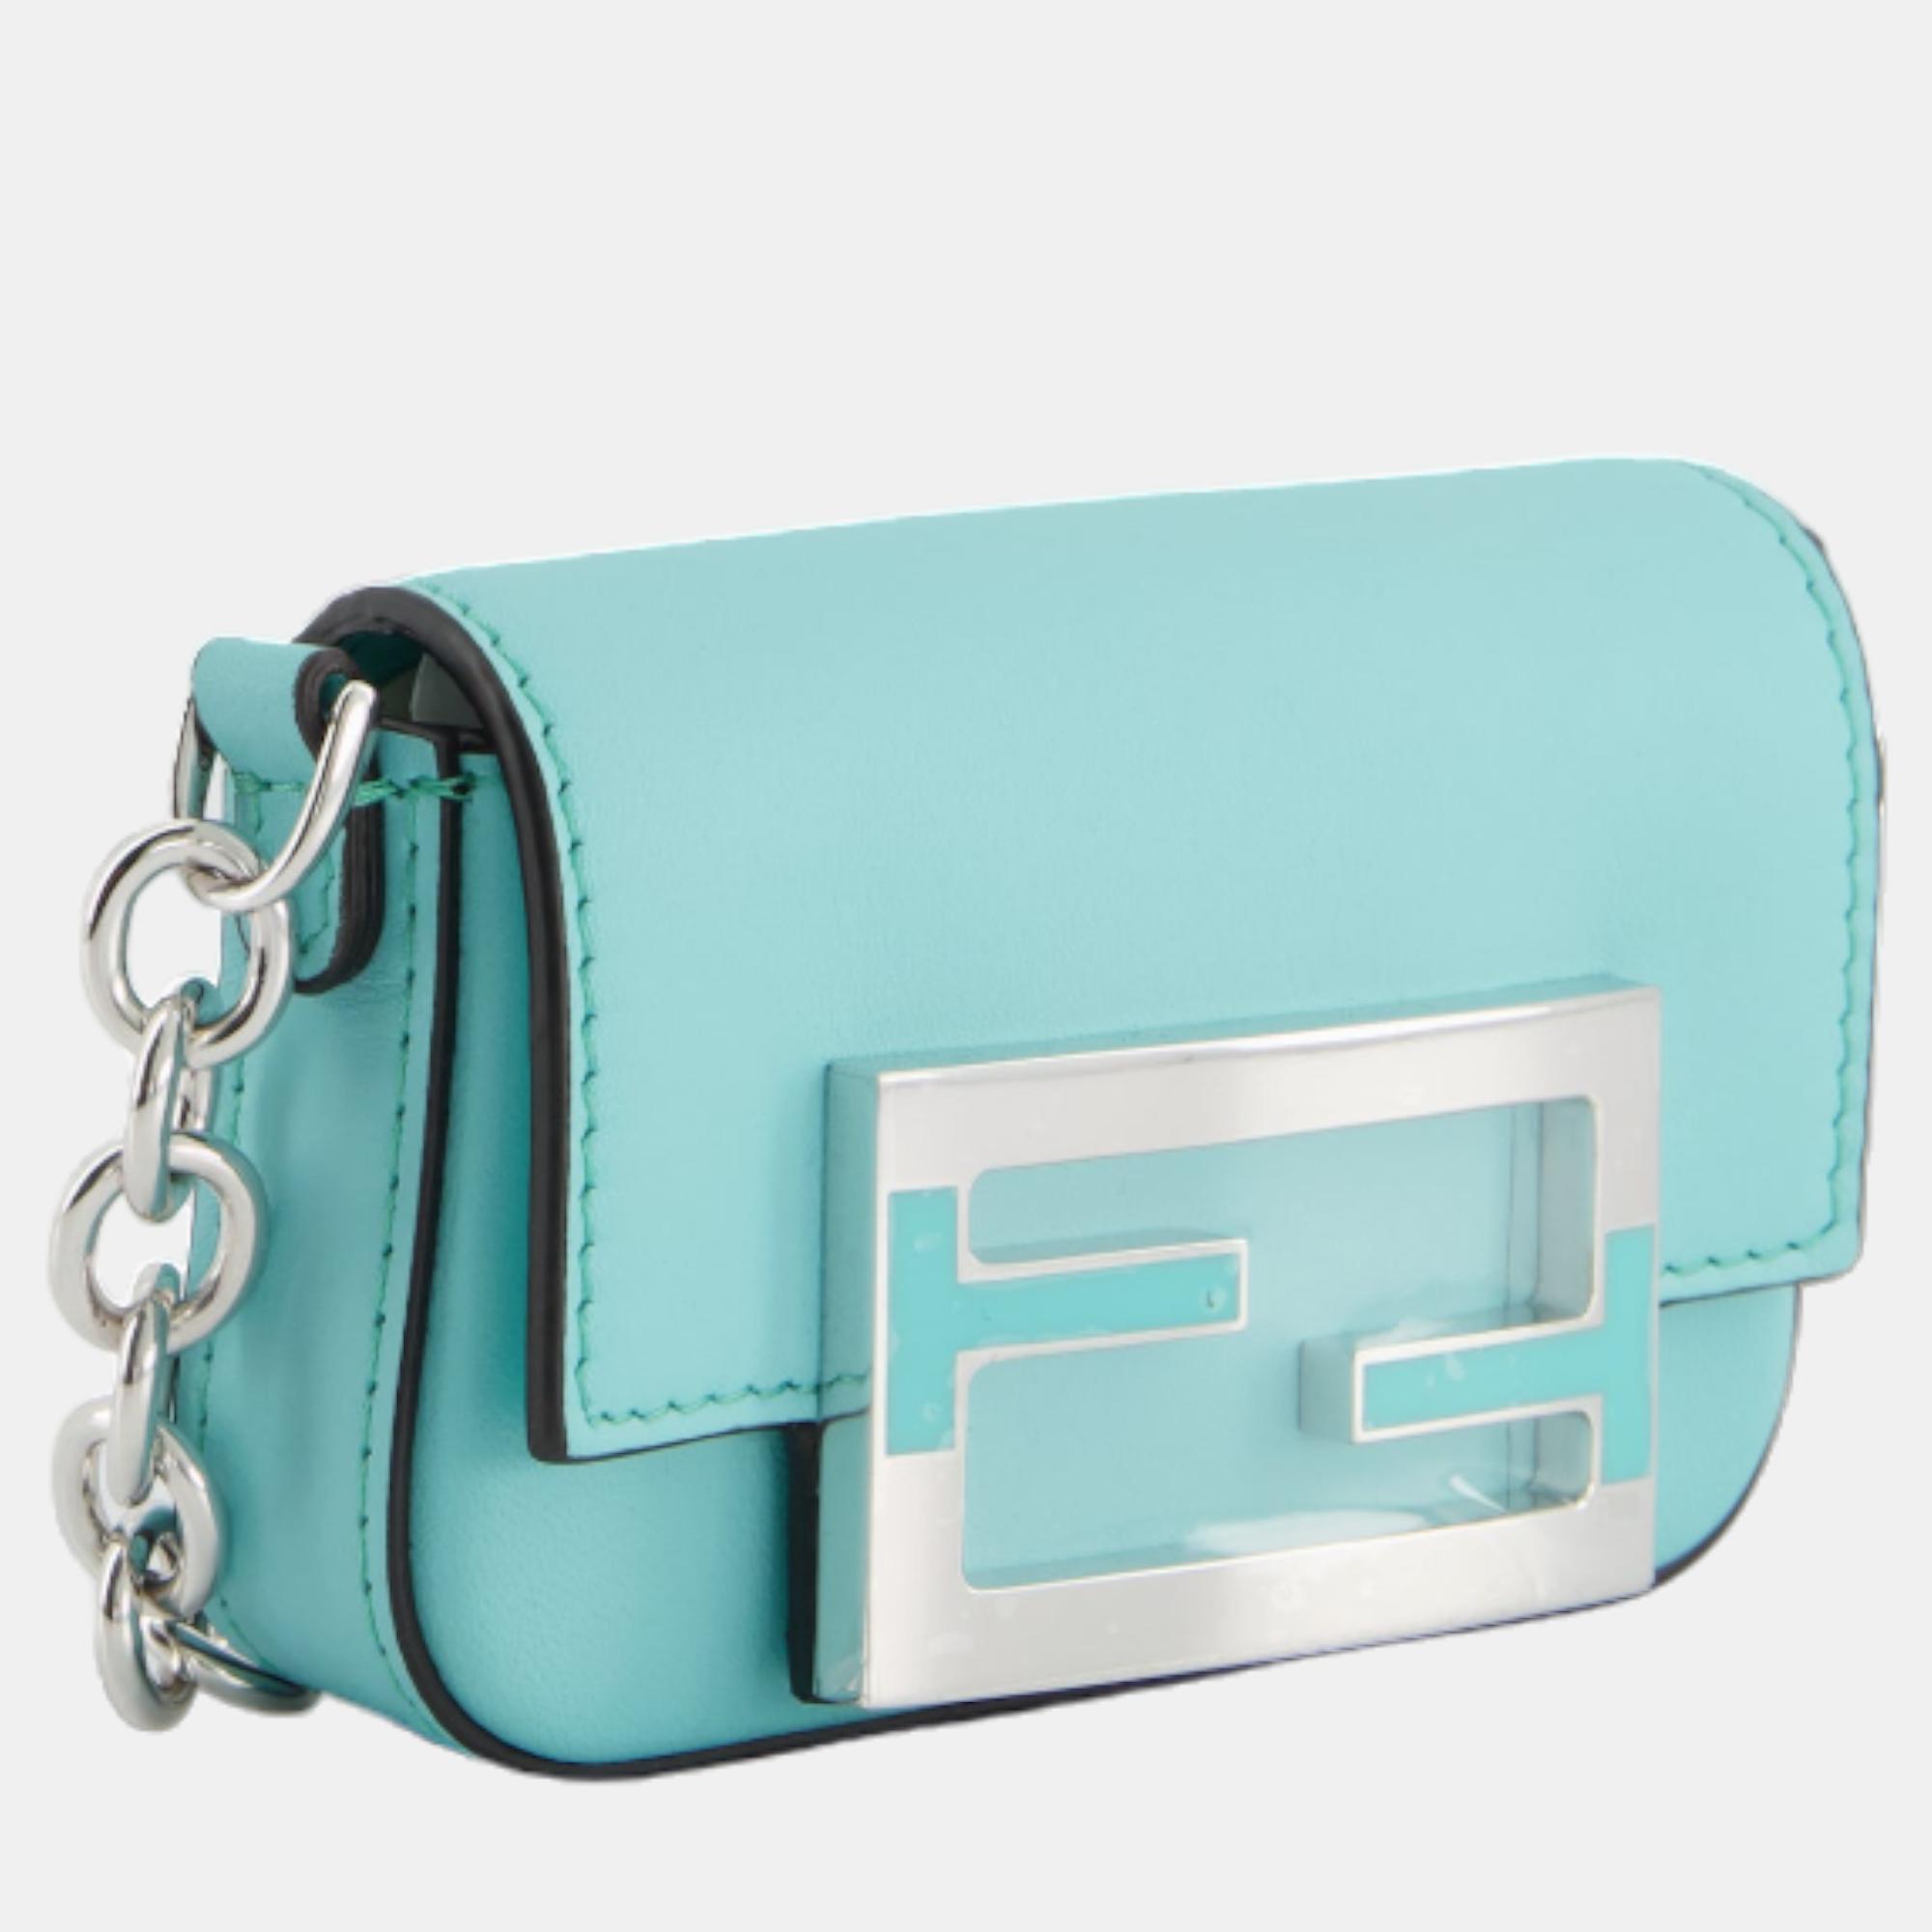 

Fendi x Tiffany&Co Tiffany Blue Leather Nano Baguette Bag with Sterling Silver Hardware and Tiffany Tag